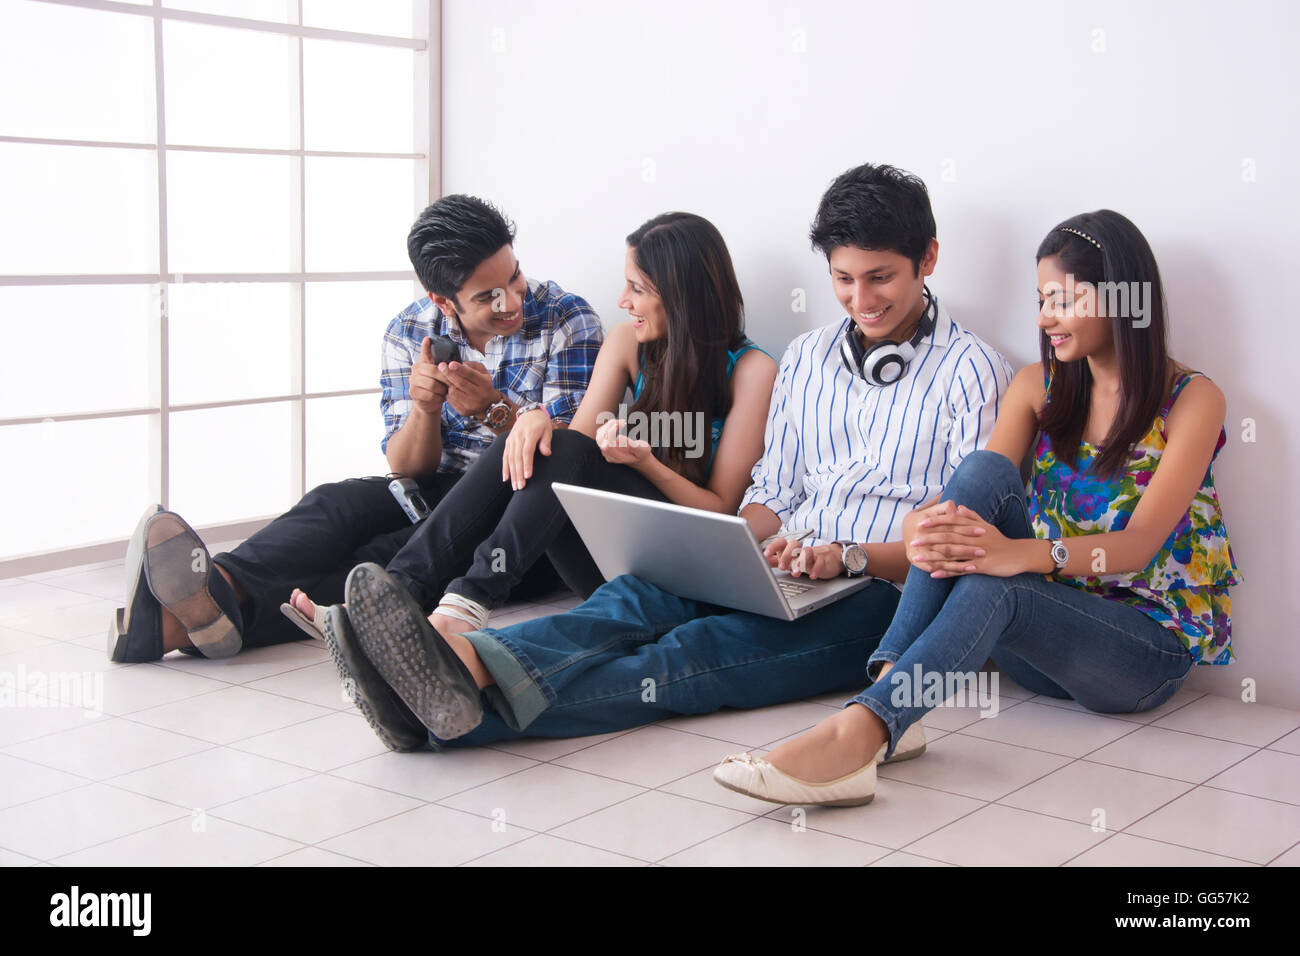 Full length of friends spending leisure time together in college Stock Photo